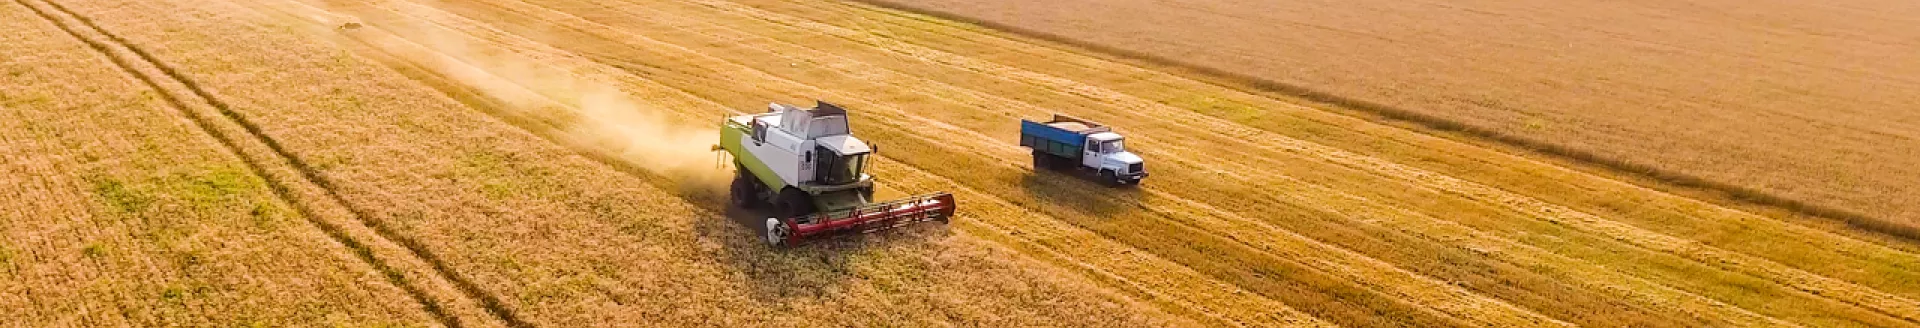 Combine harvester on a wheat field